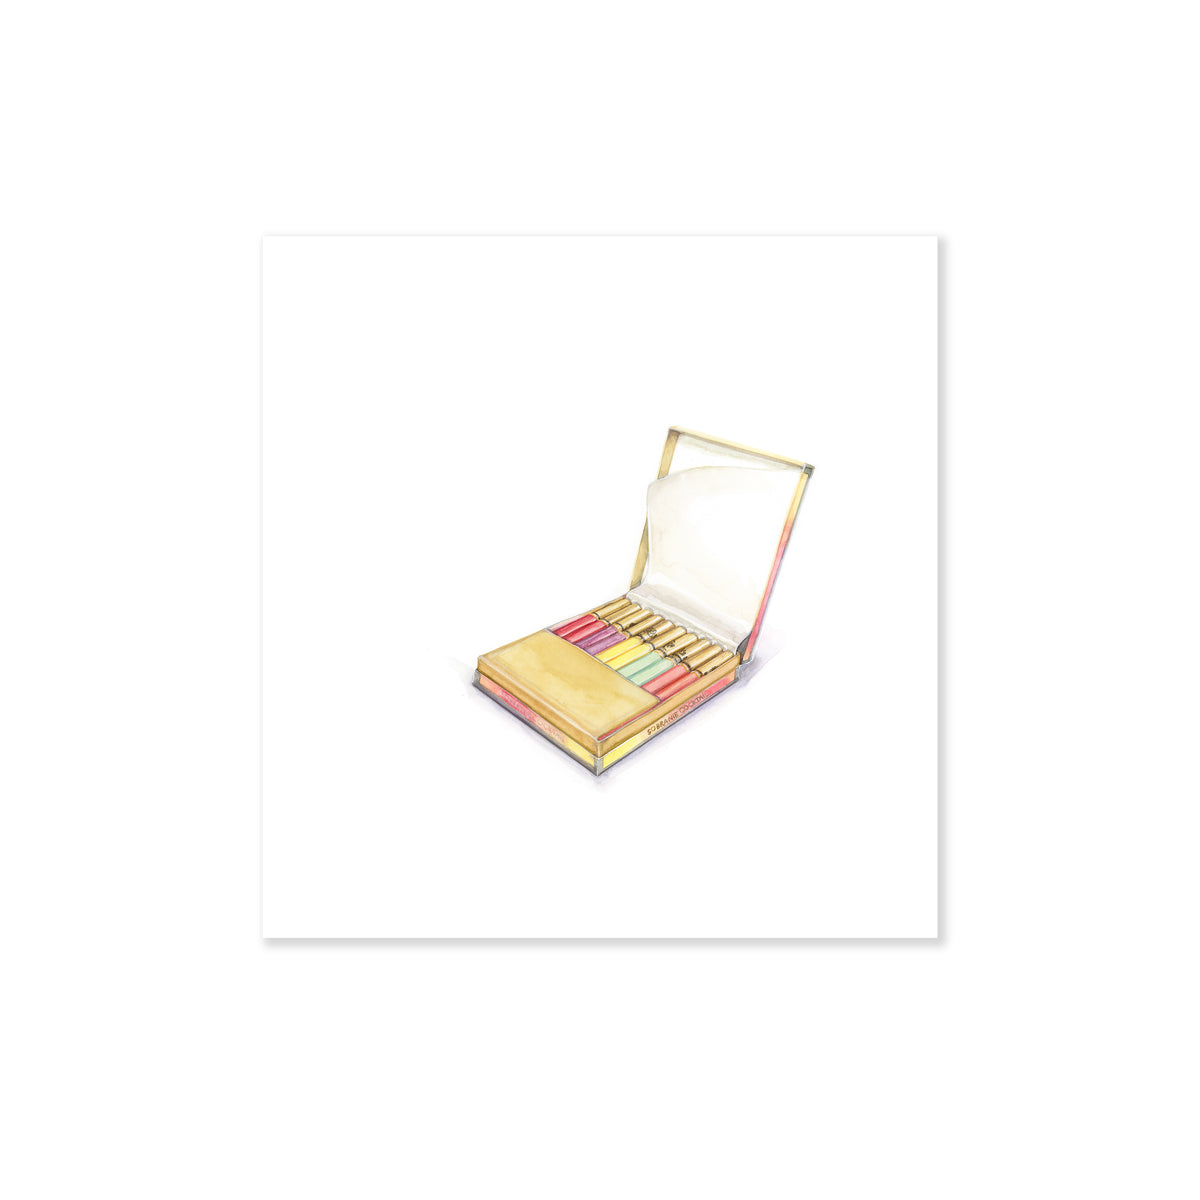 A fine art print illustrating a pack of Sobranie cocktail cigarettes in an assortment of colors in a golden case painted with watercolors on a soft white background